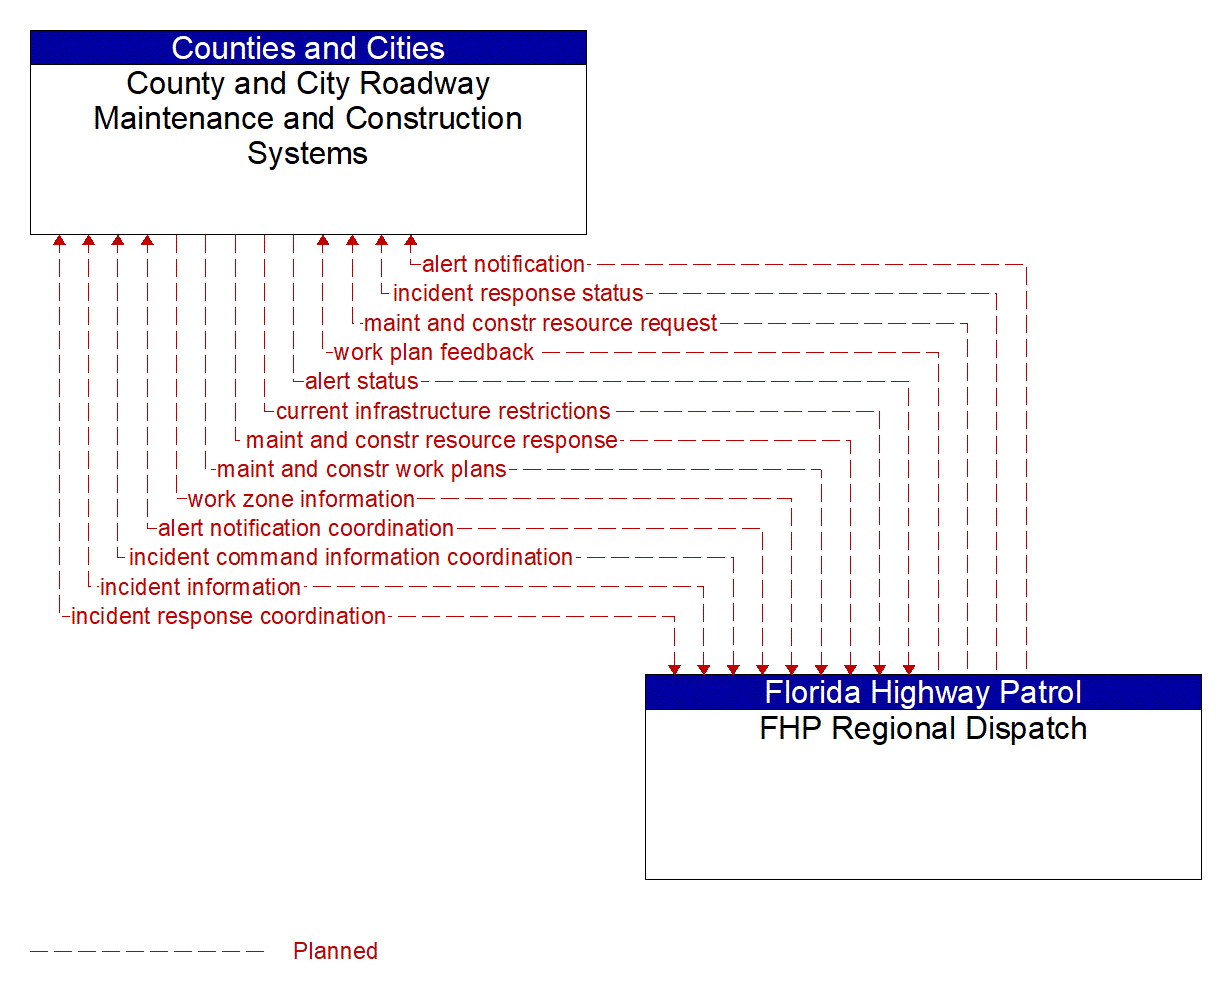 Architecture Flow Diagram: FHP Regional Dispatch <--> County and City Roadway Maintenance and Construction Systems